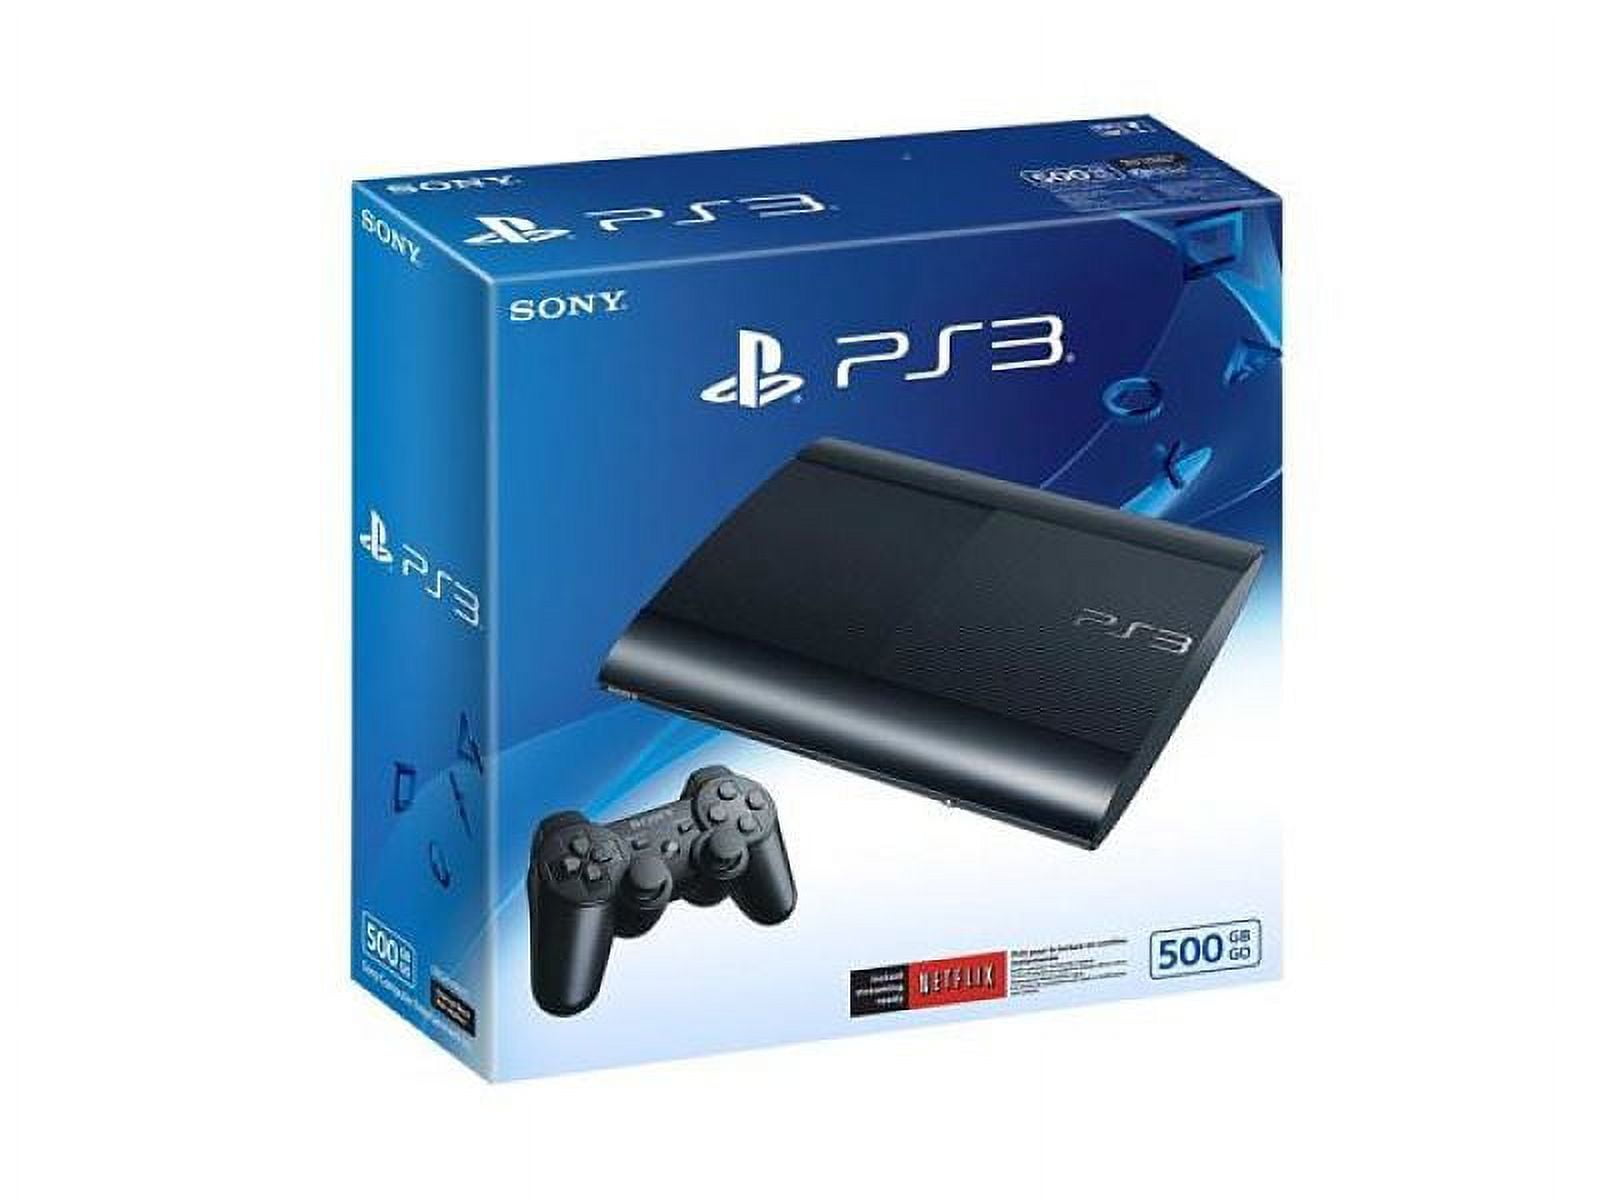 Sony PlayStation 3 Super Slim (500GB) review: Sony's old console is still a  contender - CNET